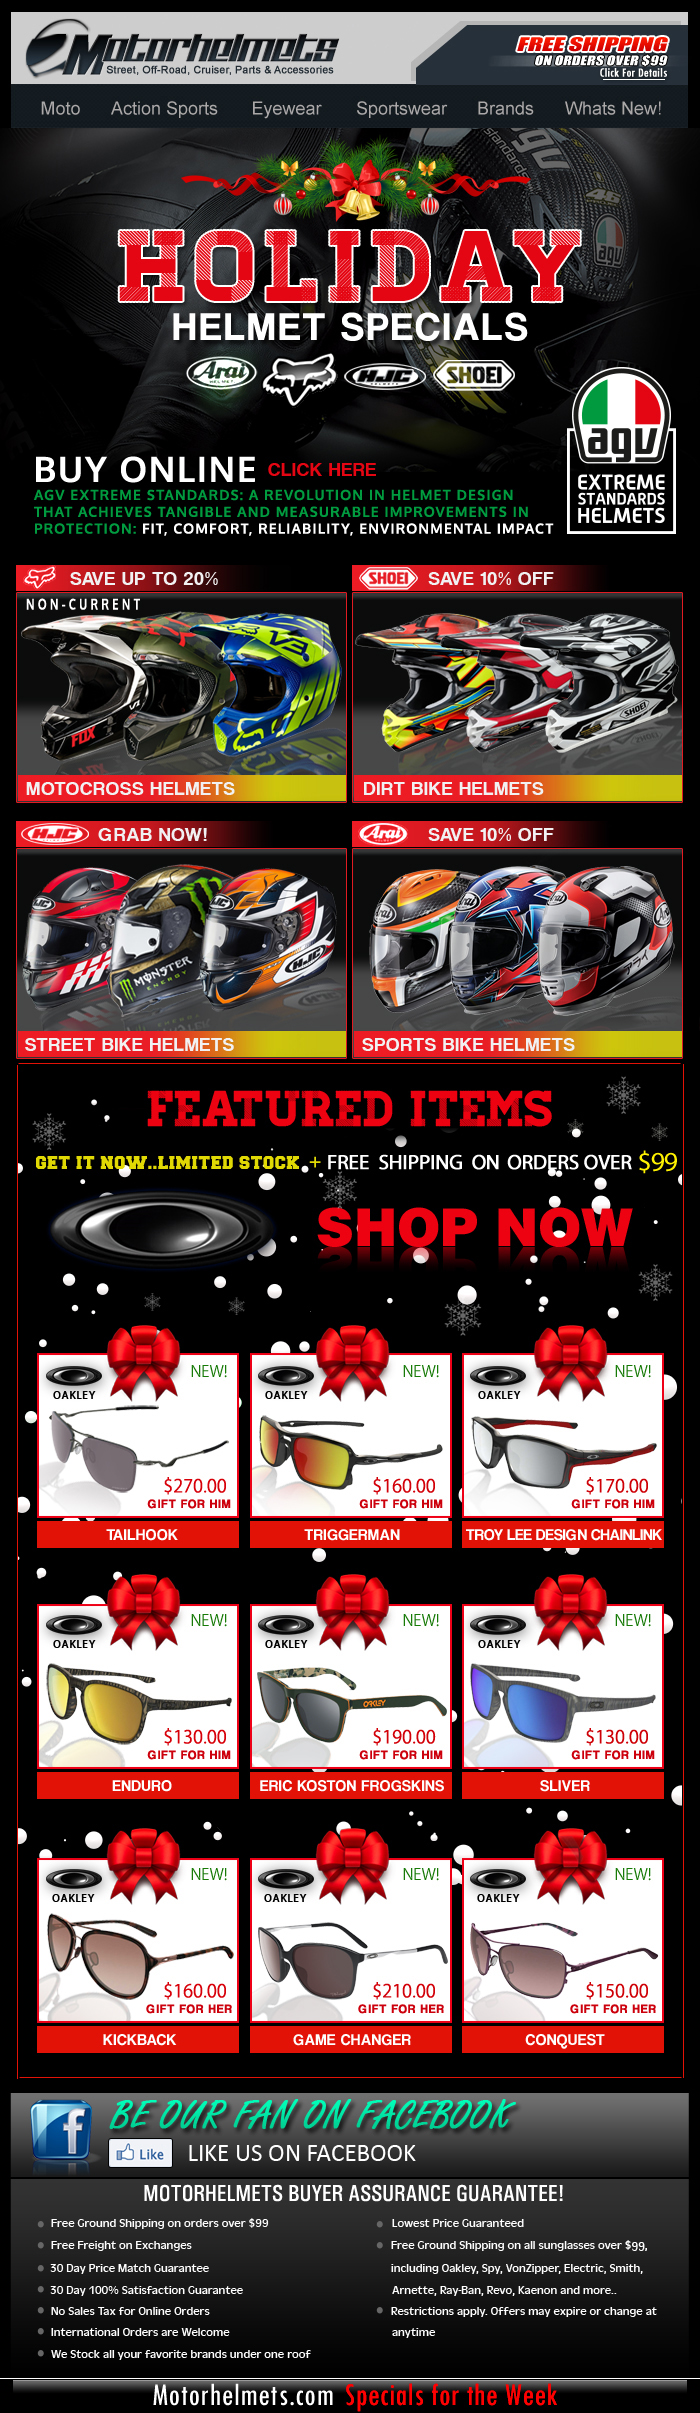 Holiday Helmet Specials...Up to 20% Off on Select Brands!